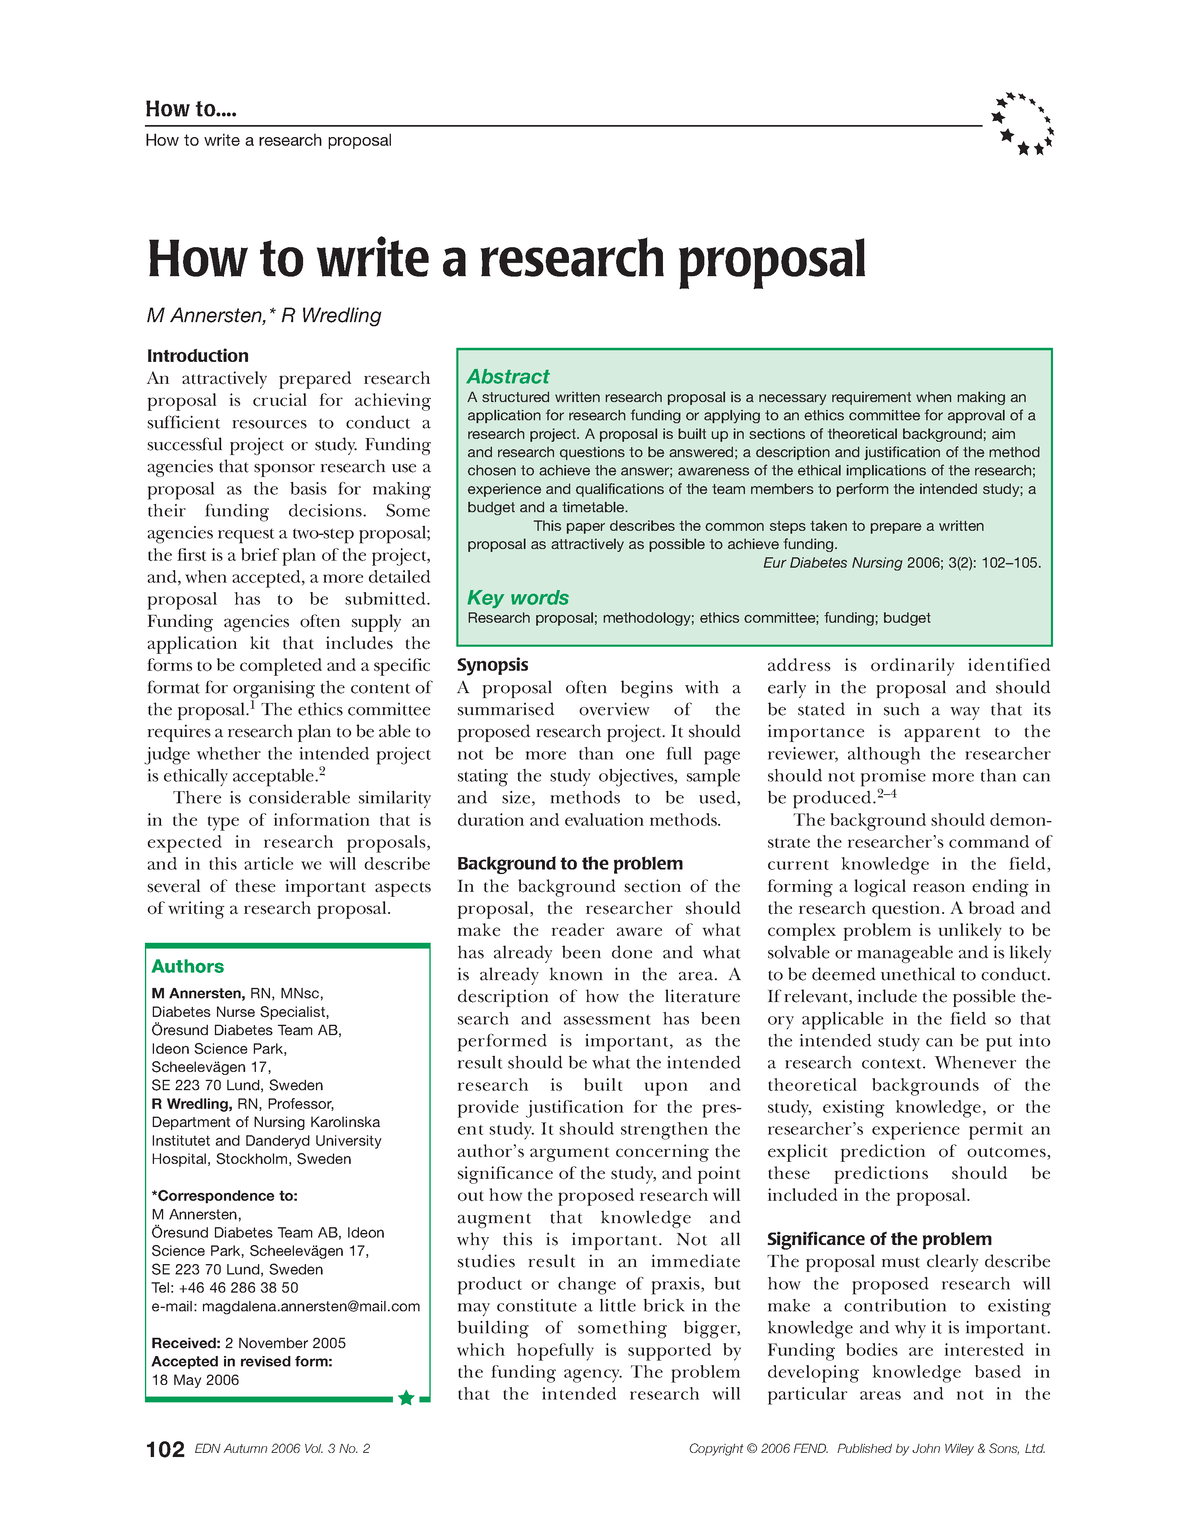 how to write a research proposal annersten